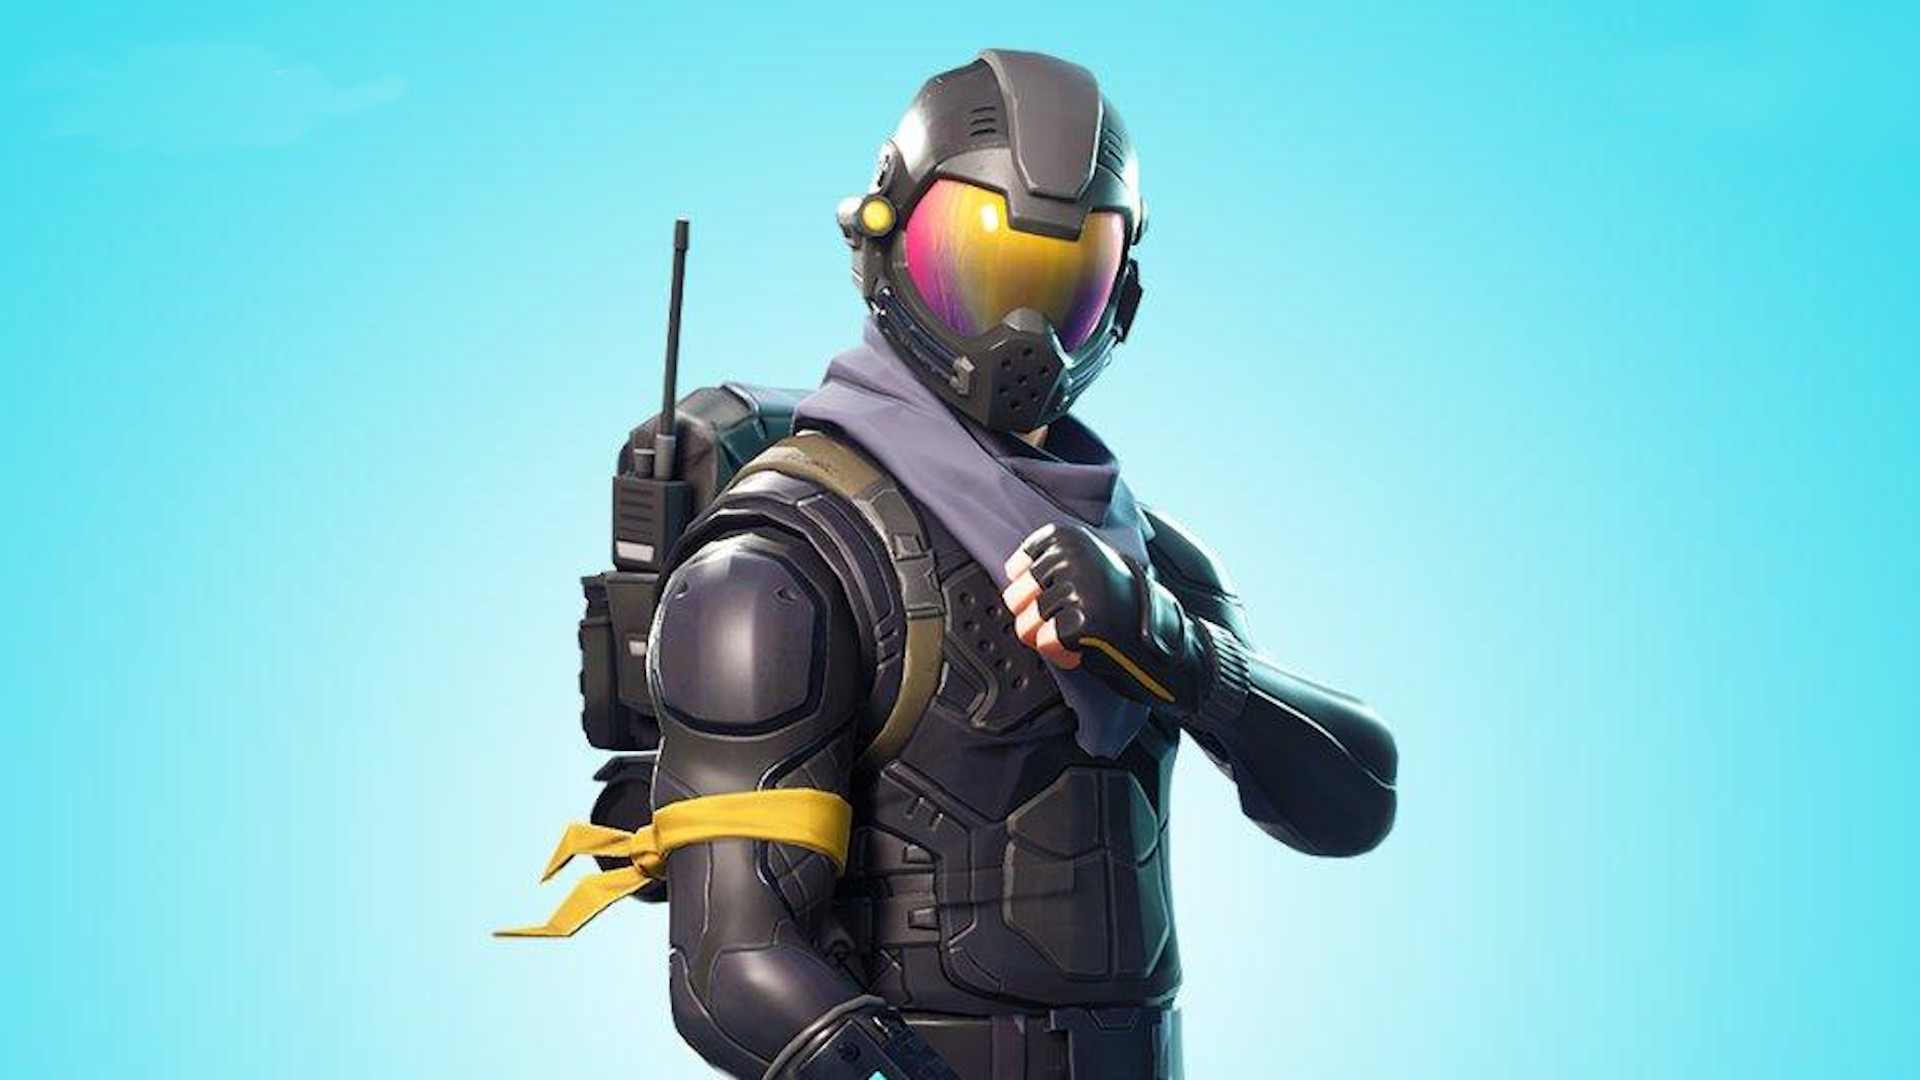 Rarest Fortnite skins: Rogue Agent posing with their left arm raised across their chest.